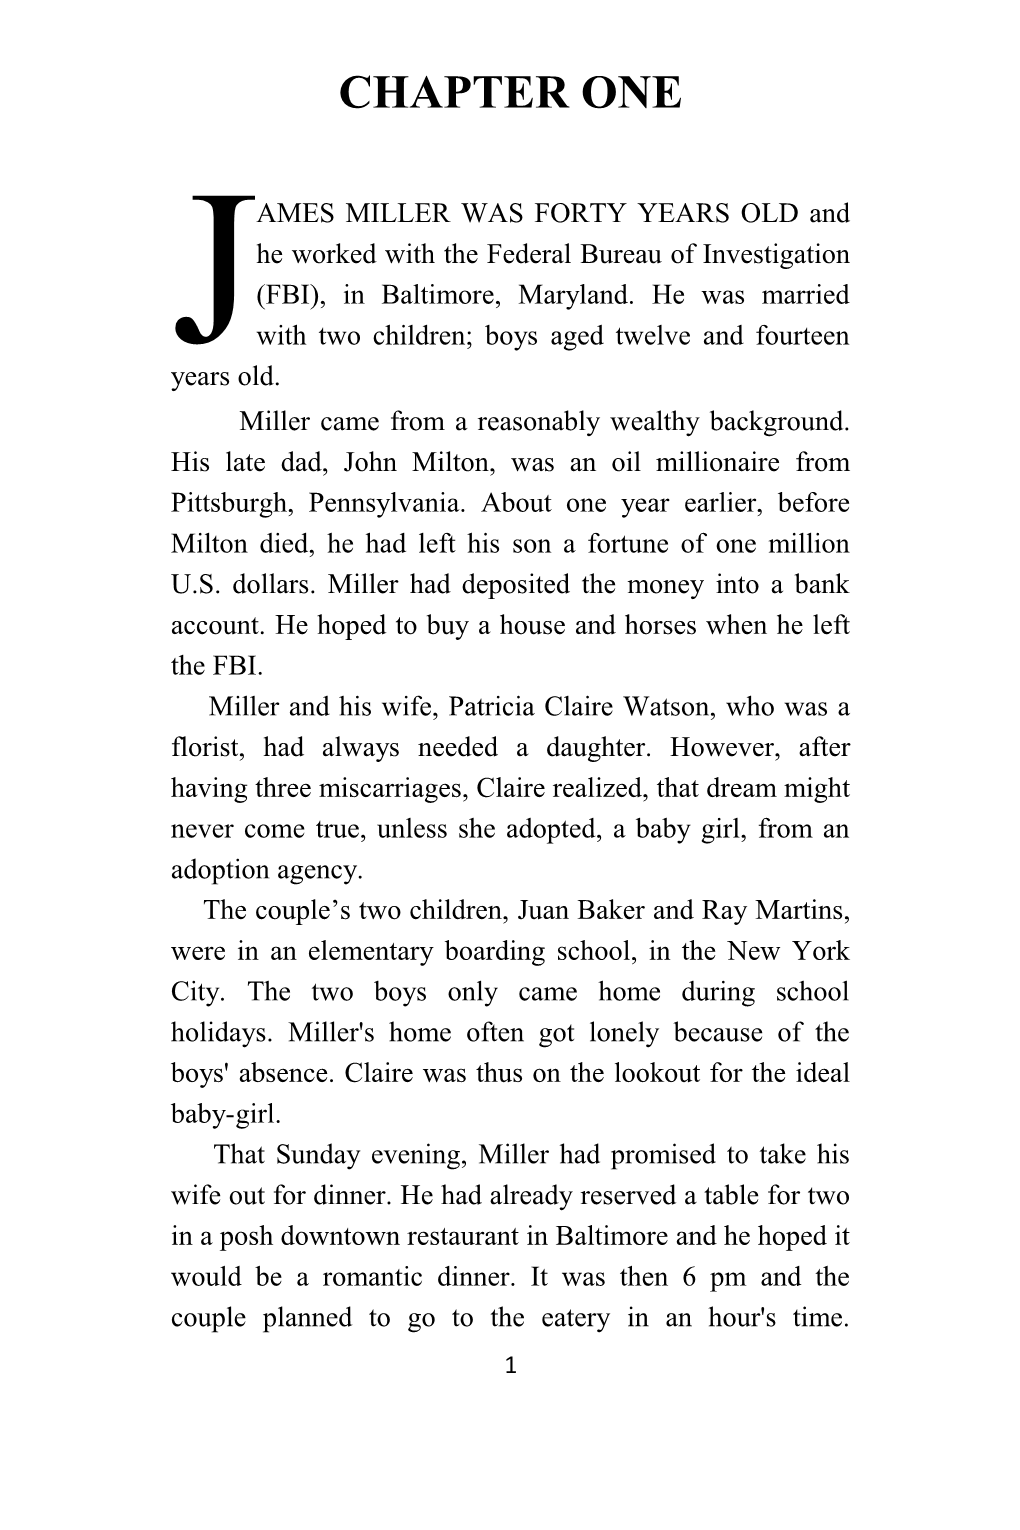 Miller Came from a Reasonably Wealthy Background. His Late Dad, John Milton, Was an Oil